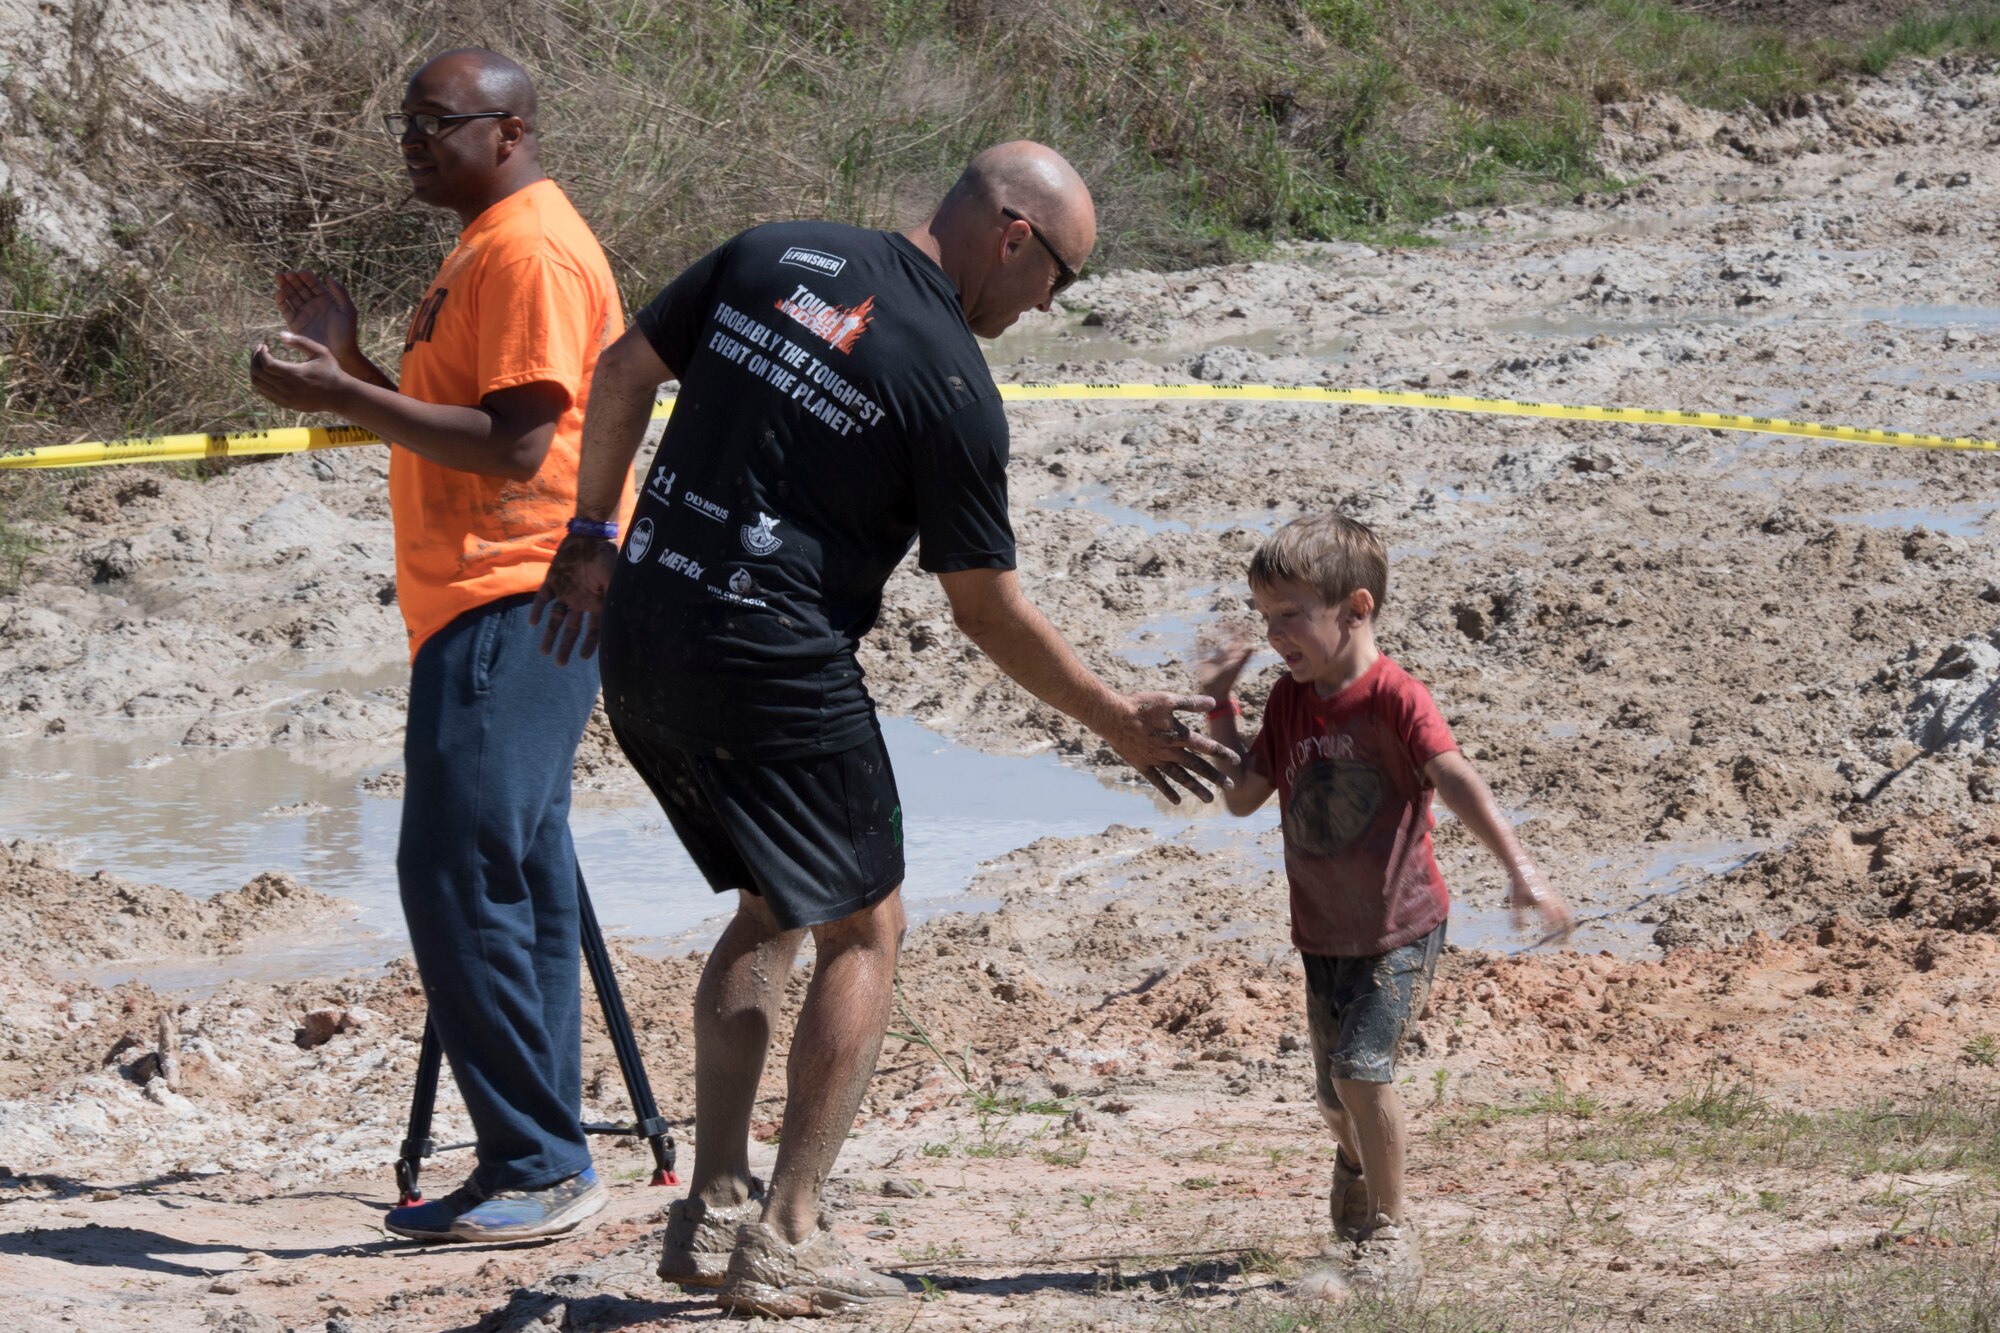 A son high-fives his father after completing the last obstacle of the Moody Mud Run children’s course, May 6, 2017, in Ray City, Ga. The Fourth Annual Moody Mud consisted of both adult and child course that challenged more than 600 participants with obstacles over 4.2 miles. (U.S. Air Force photo by Staff Sgt. Eric Summers Jr.)